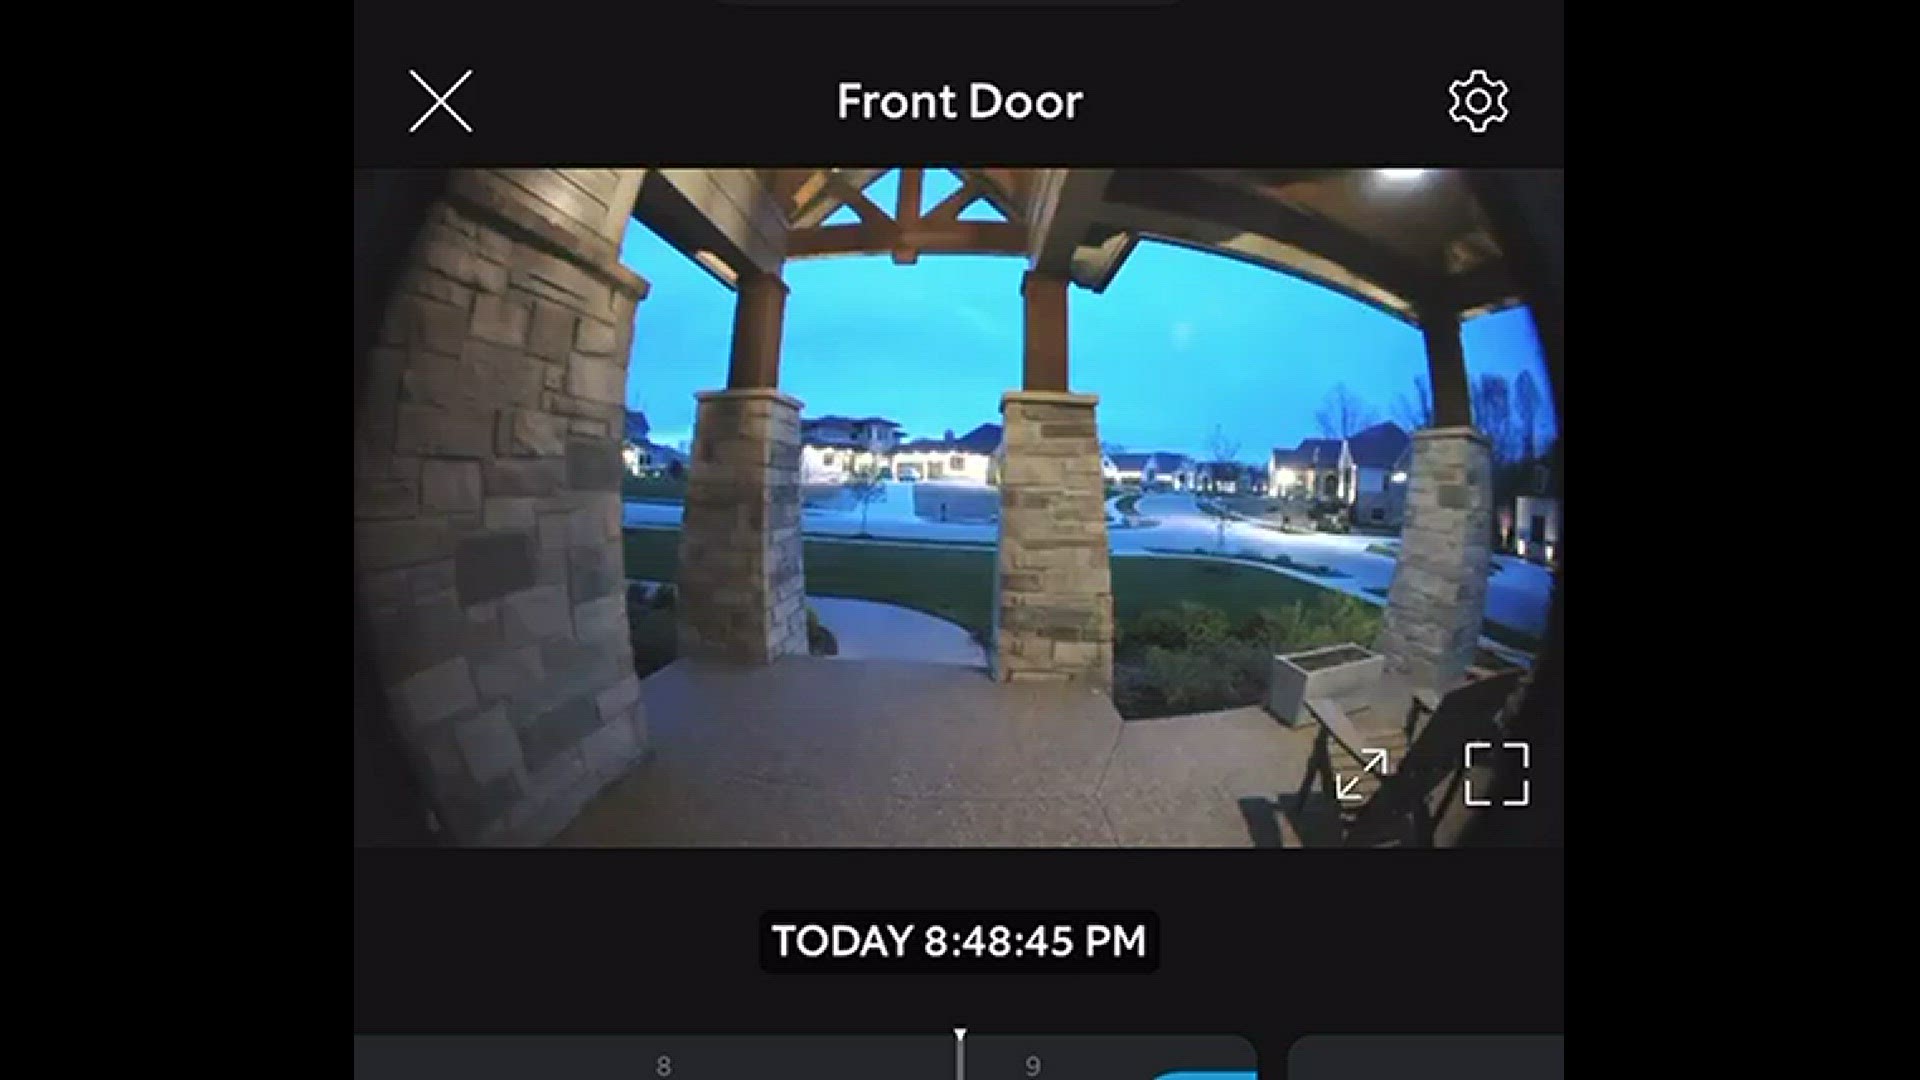 13News viewer Kelly Kyle sent in video of Ring doorbell footage that appears to show a flash of light in central Indiana.